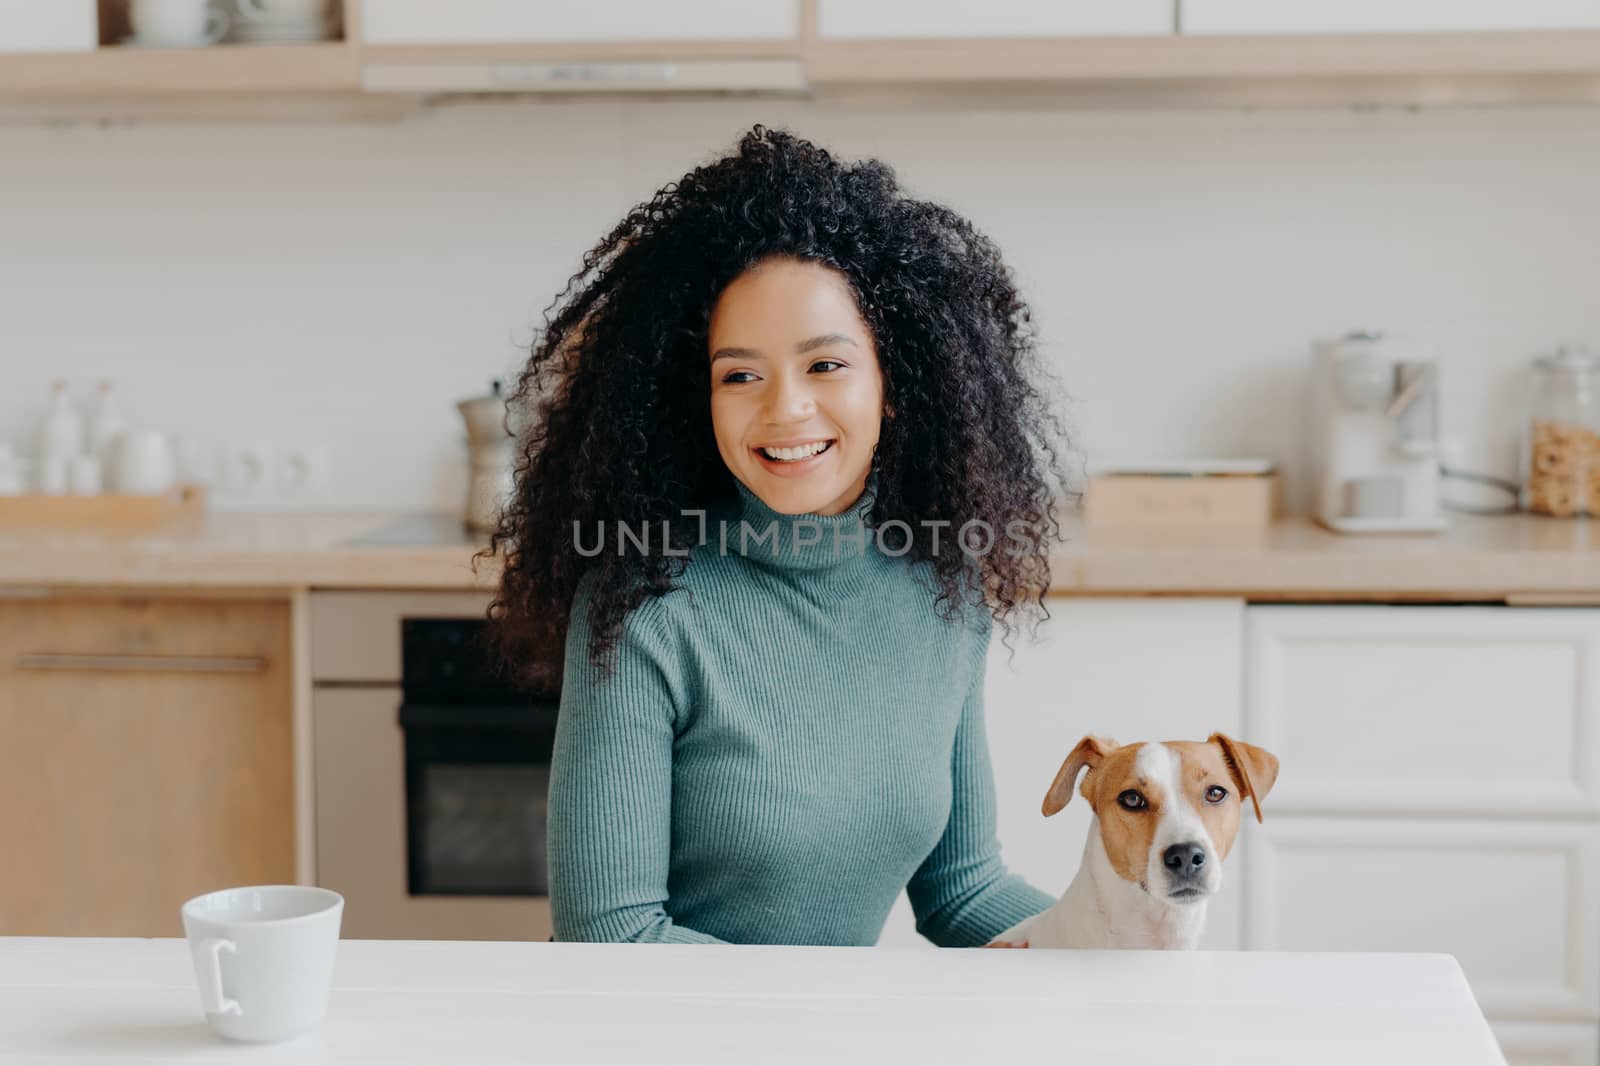 Happy dark skinned girl looks thoughtfully away, has pleasant smile, dressed in casual wear, drinks hot beverage, poses with domestic animal against kitchen interior. Female dog owner at home by vkstock